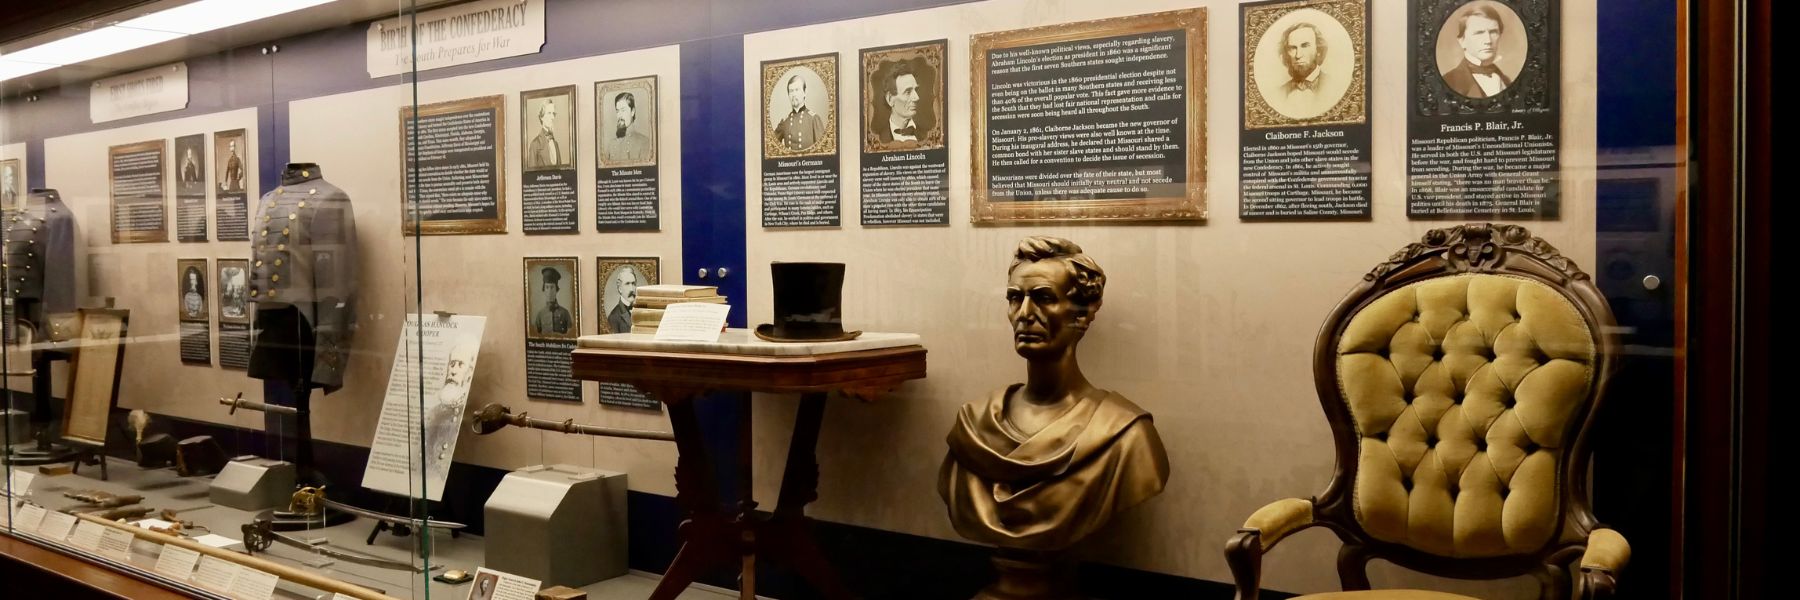 The Missouri Civil War Museum features artifacts that tell the story of Abraham Lincoln.